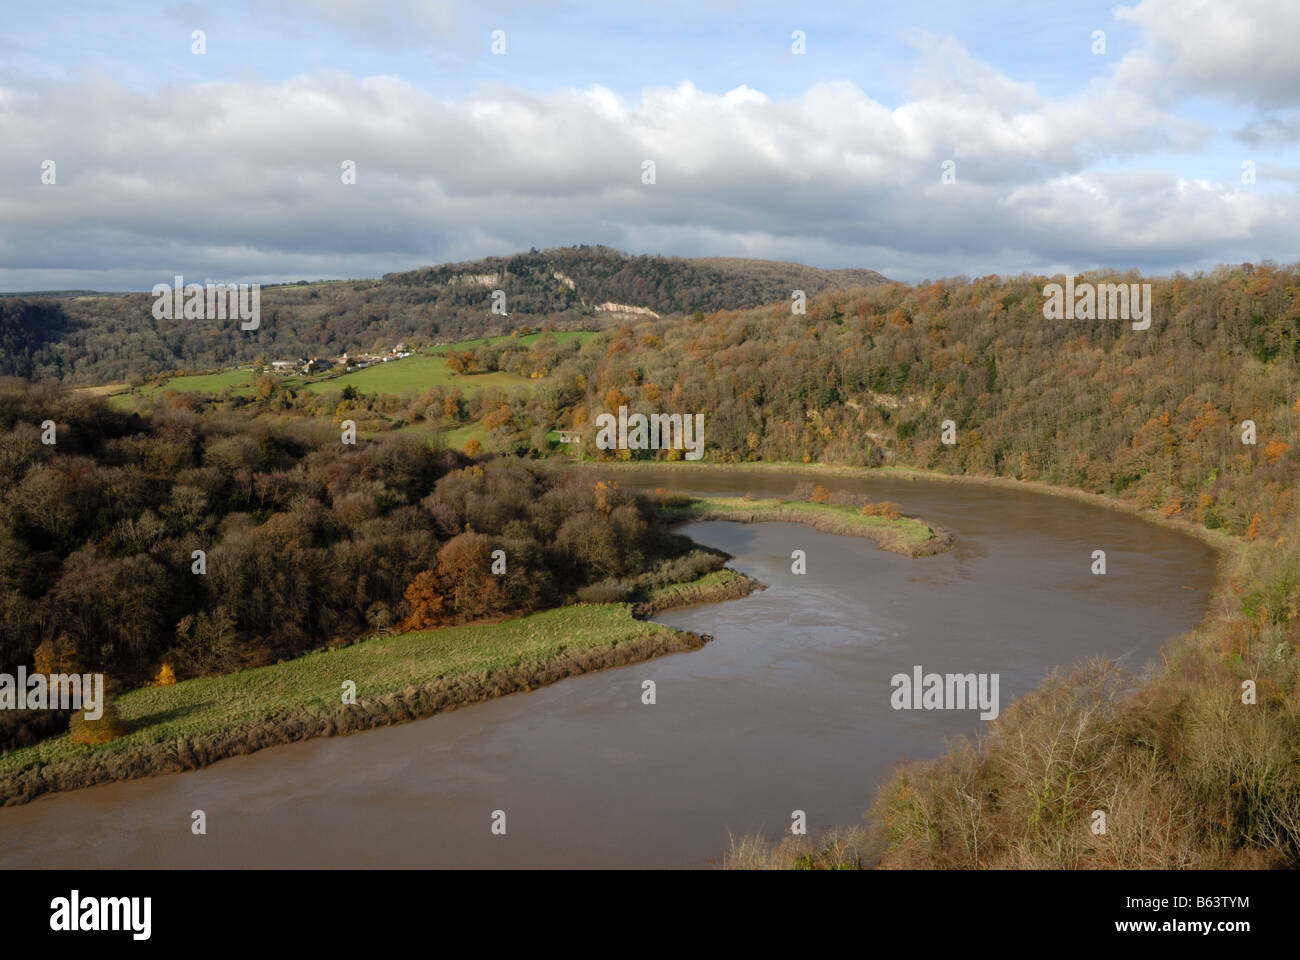 Bend in the river Wye at Wintours Leap Stock Photo